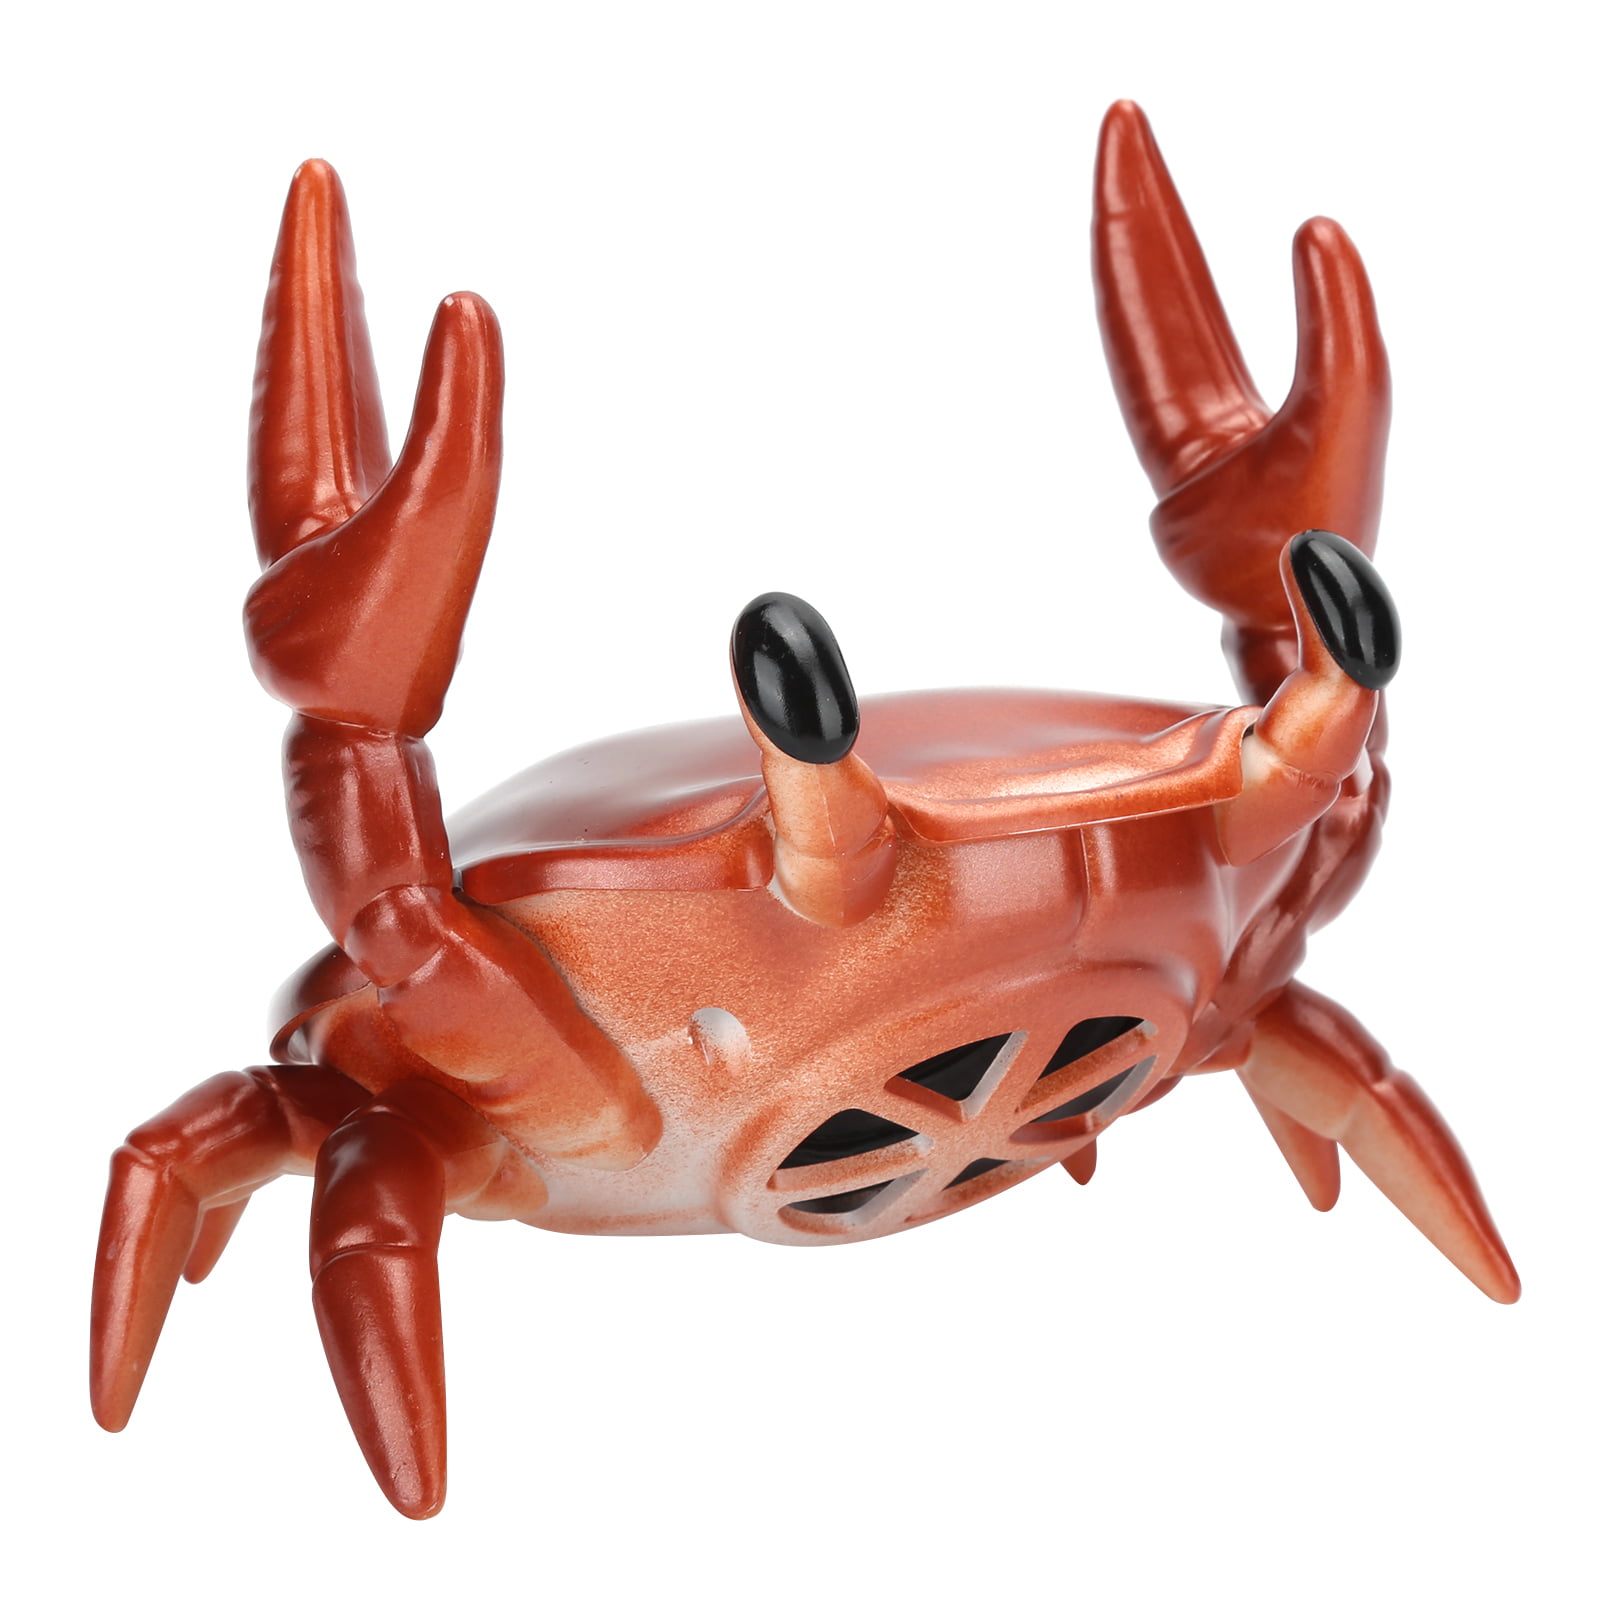 CRAB - SUPPORT UNIVERSEL POUR SMARTPHONE